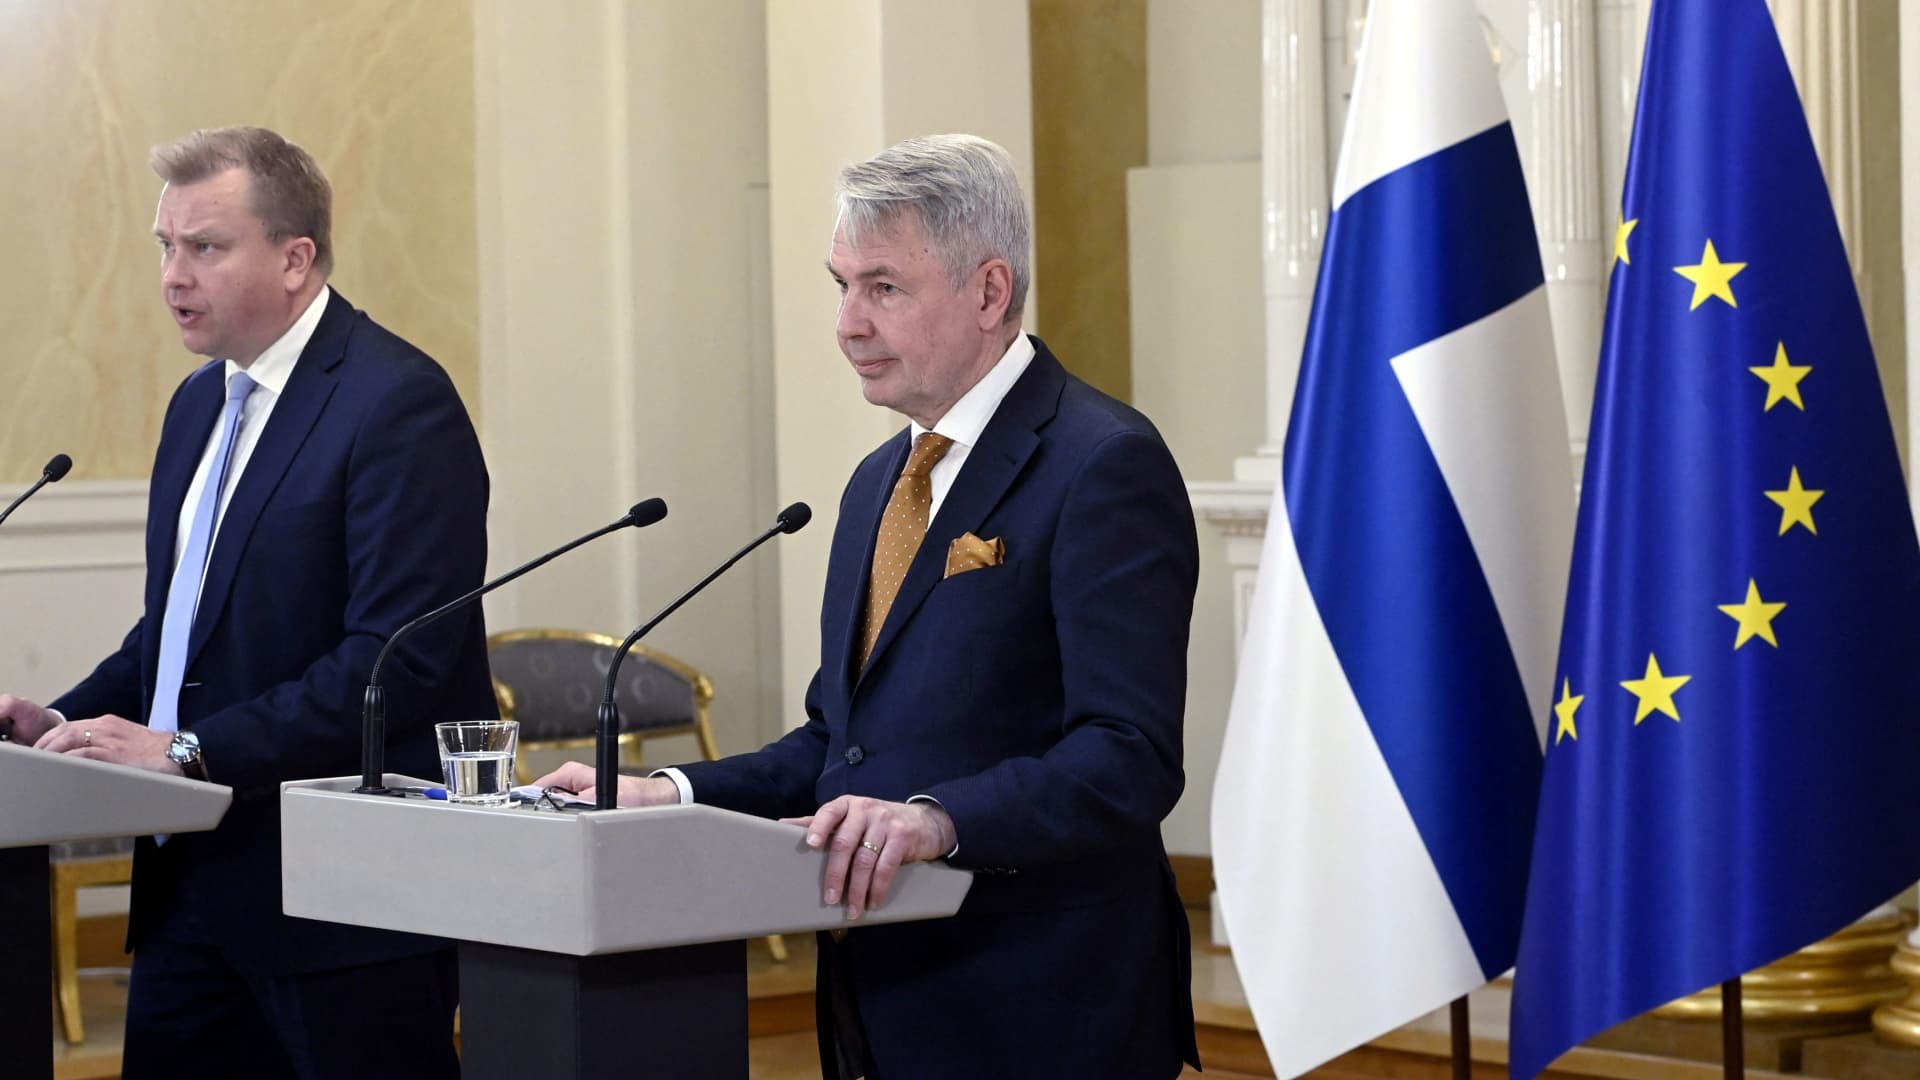 Finland's Defence Minister Antti Kaikkonen and Finland's Foreign Minister Pekka Haavisto attend a news conference on Finland's security policy decisions at the Presidential Palace in Helsinki, Finland, May 15, 2022. 